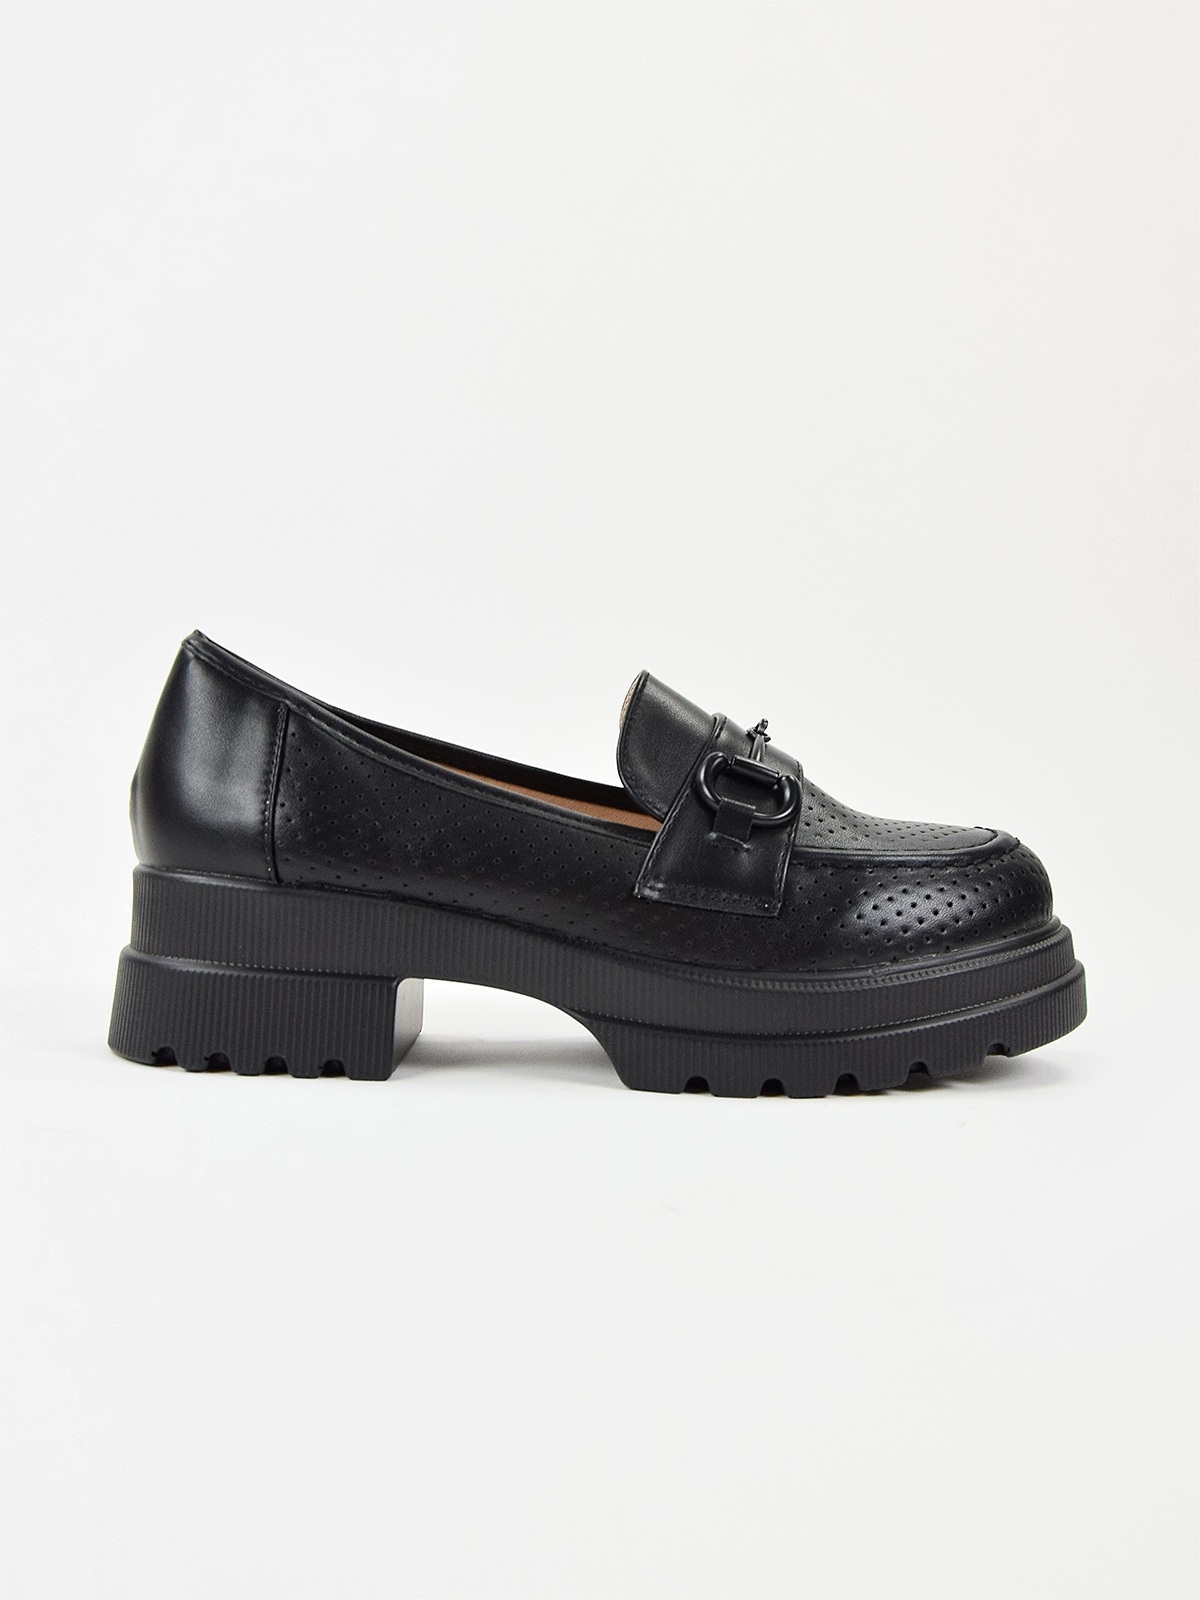 Chunky loafers with front metal trim in black